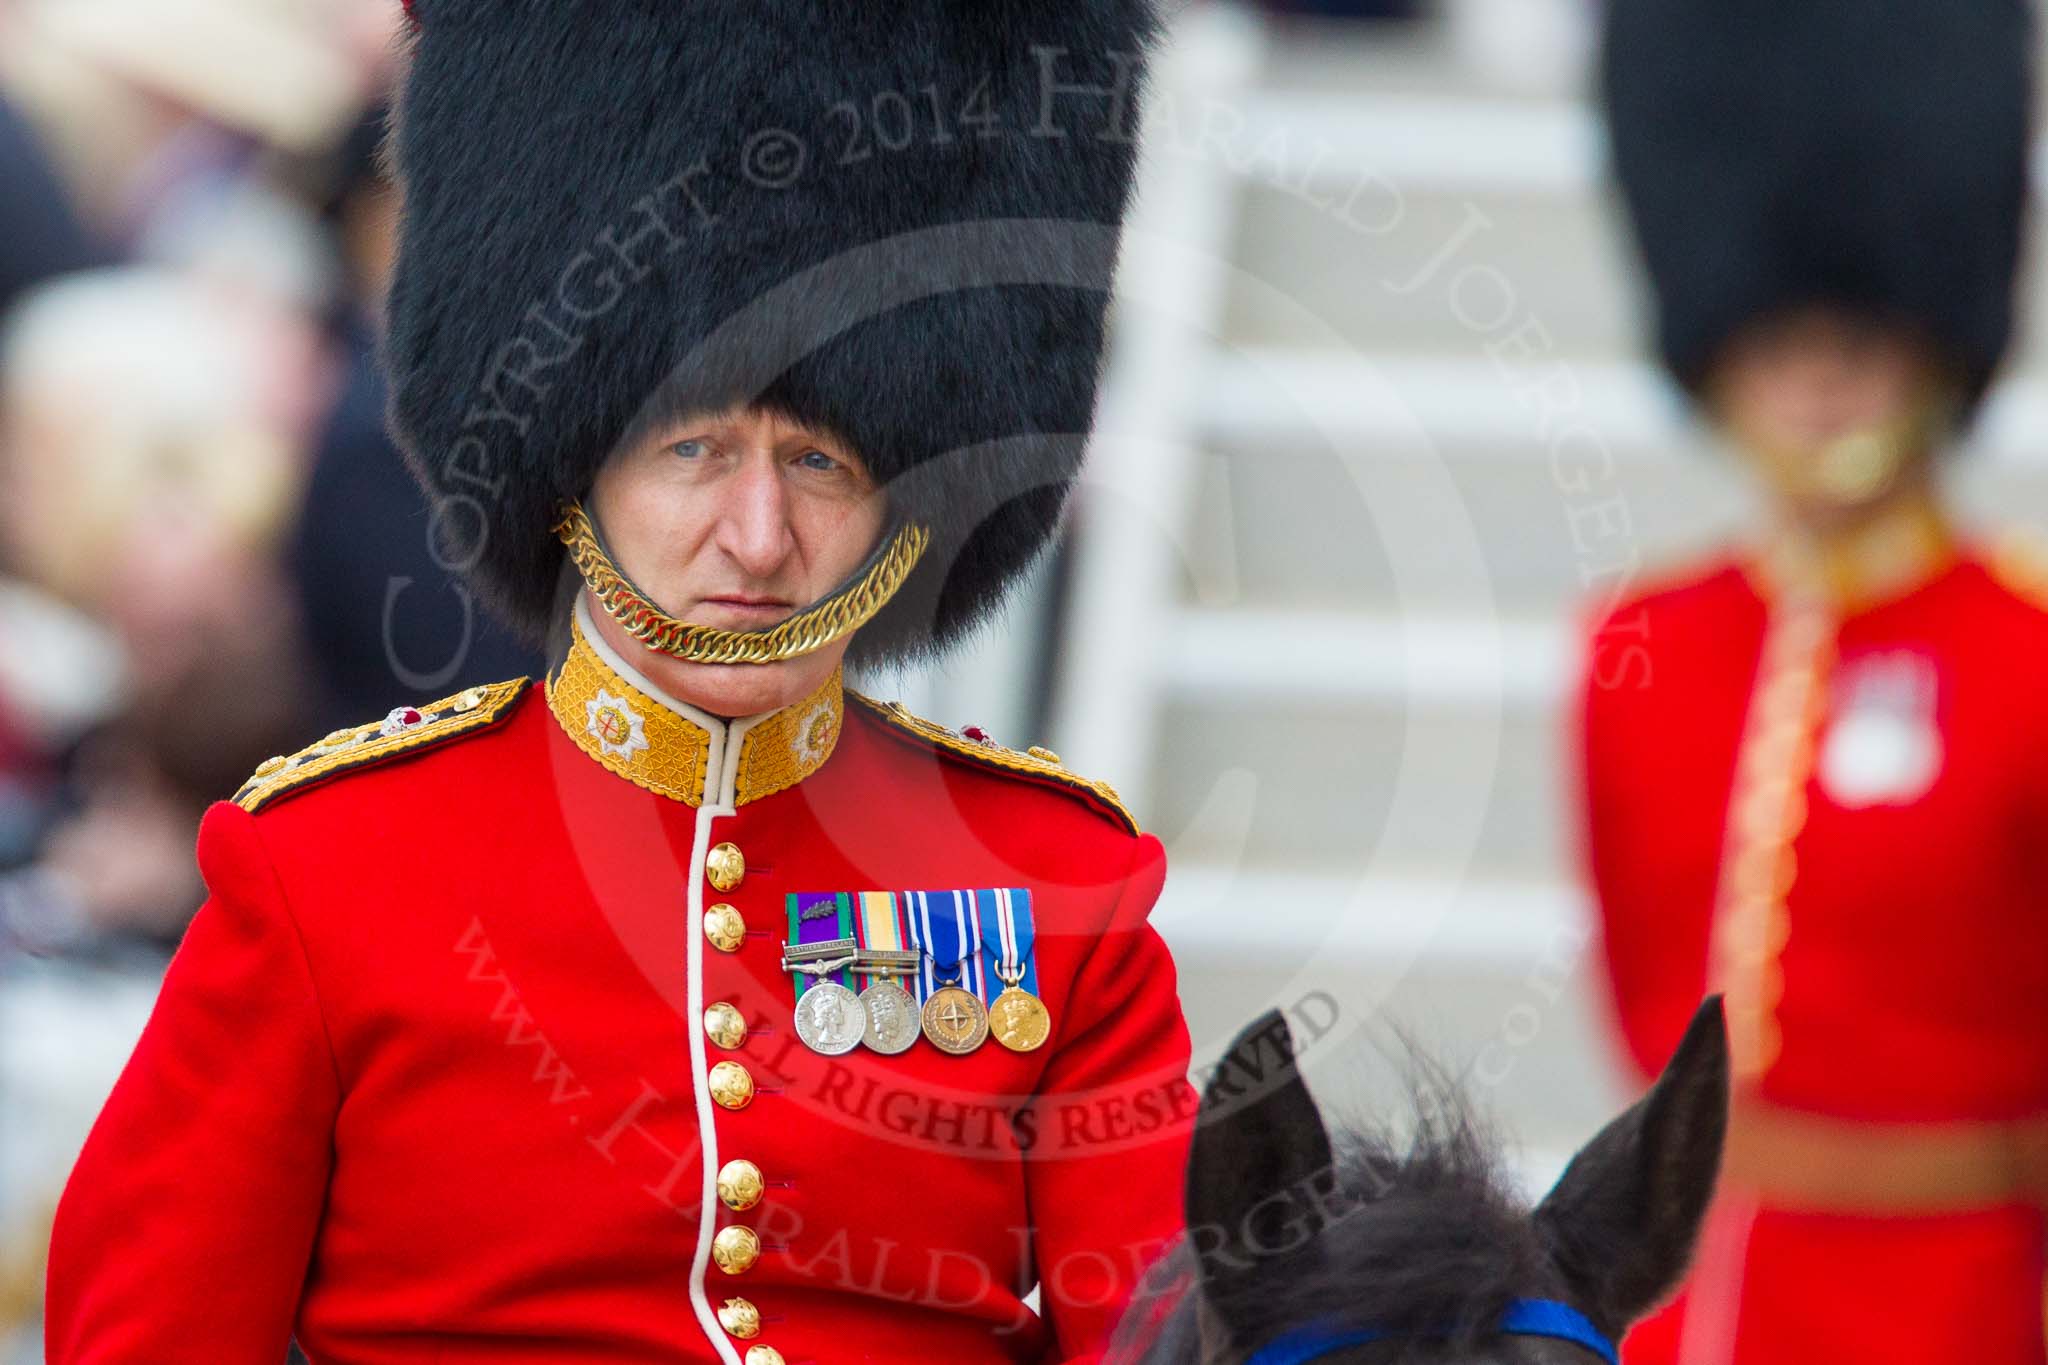 Trooping the Colour 2014.
Horse Guards Parade, Westminster,
London SW1A,

United Kingdom,
on 14 June 2014 at 11:03, image #399